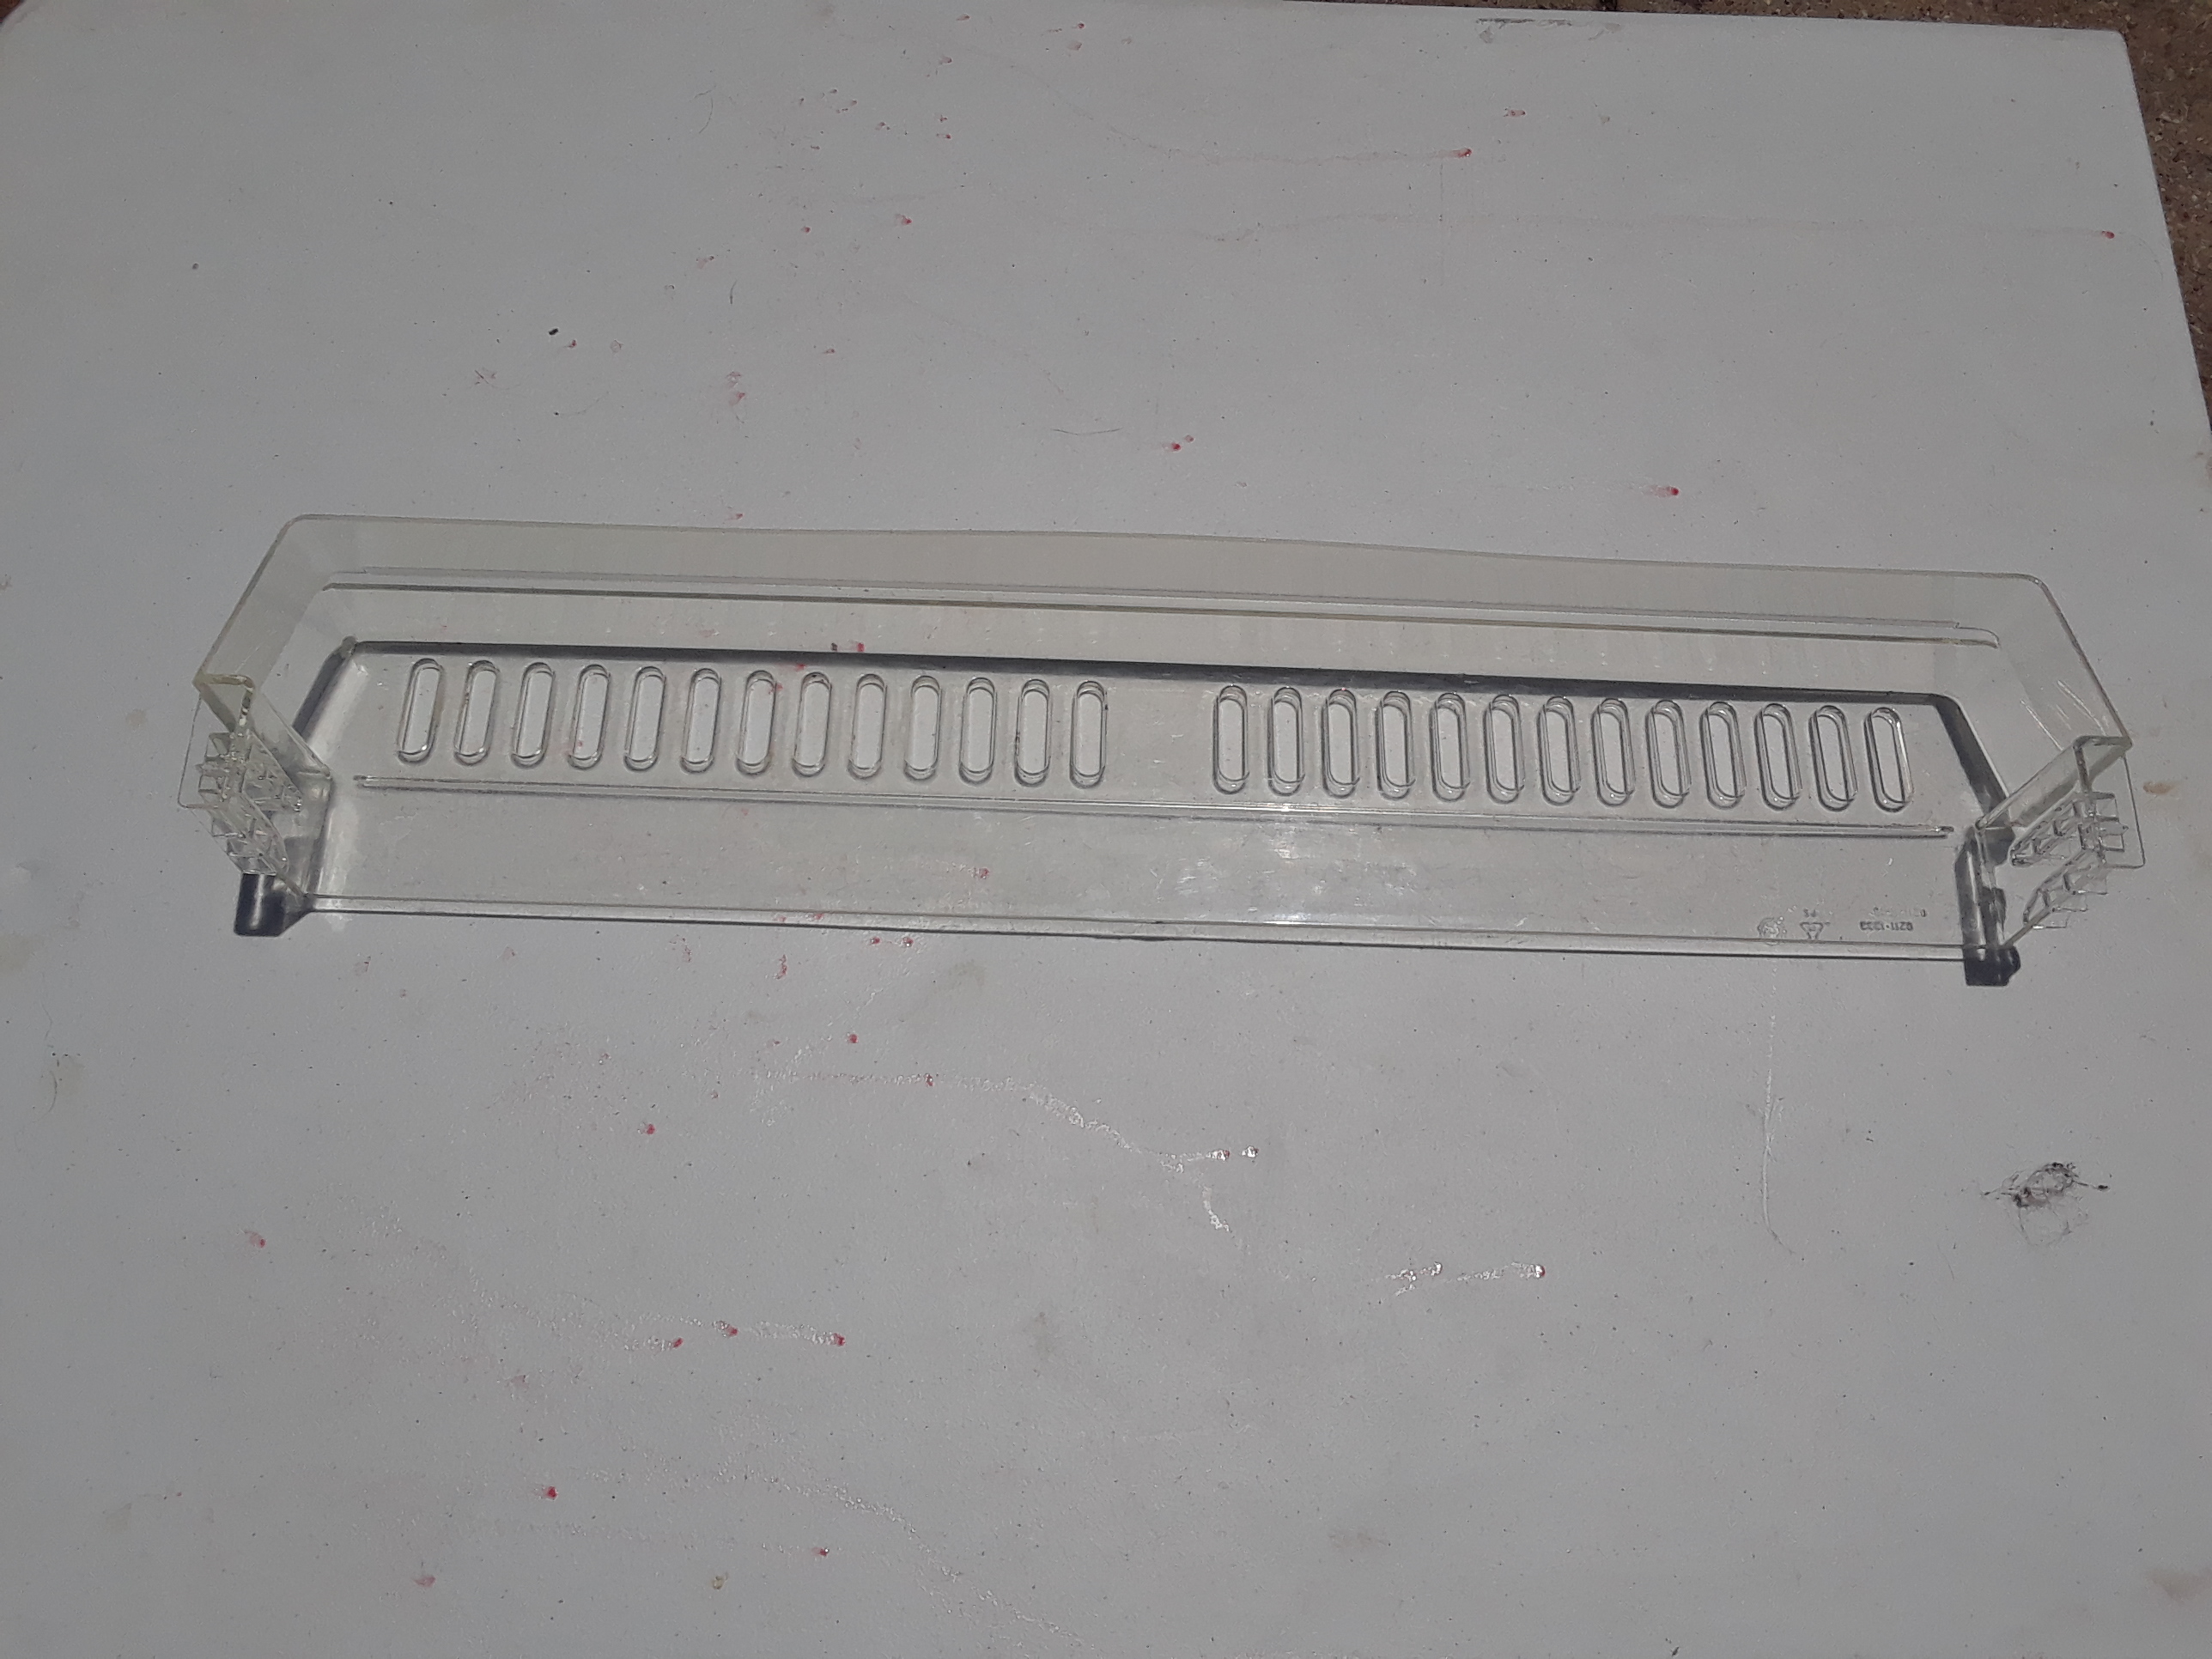 OUT OF STOCK Haier Refrigerator Door Rack 02111333 Model RRTG21PAAW